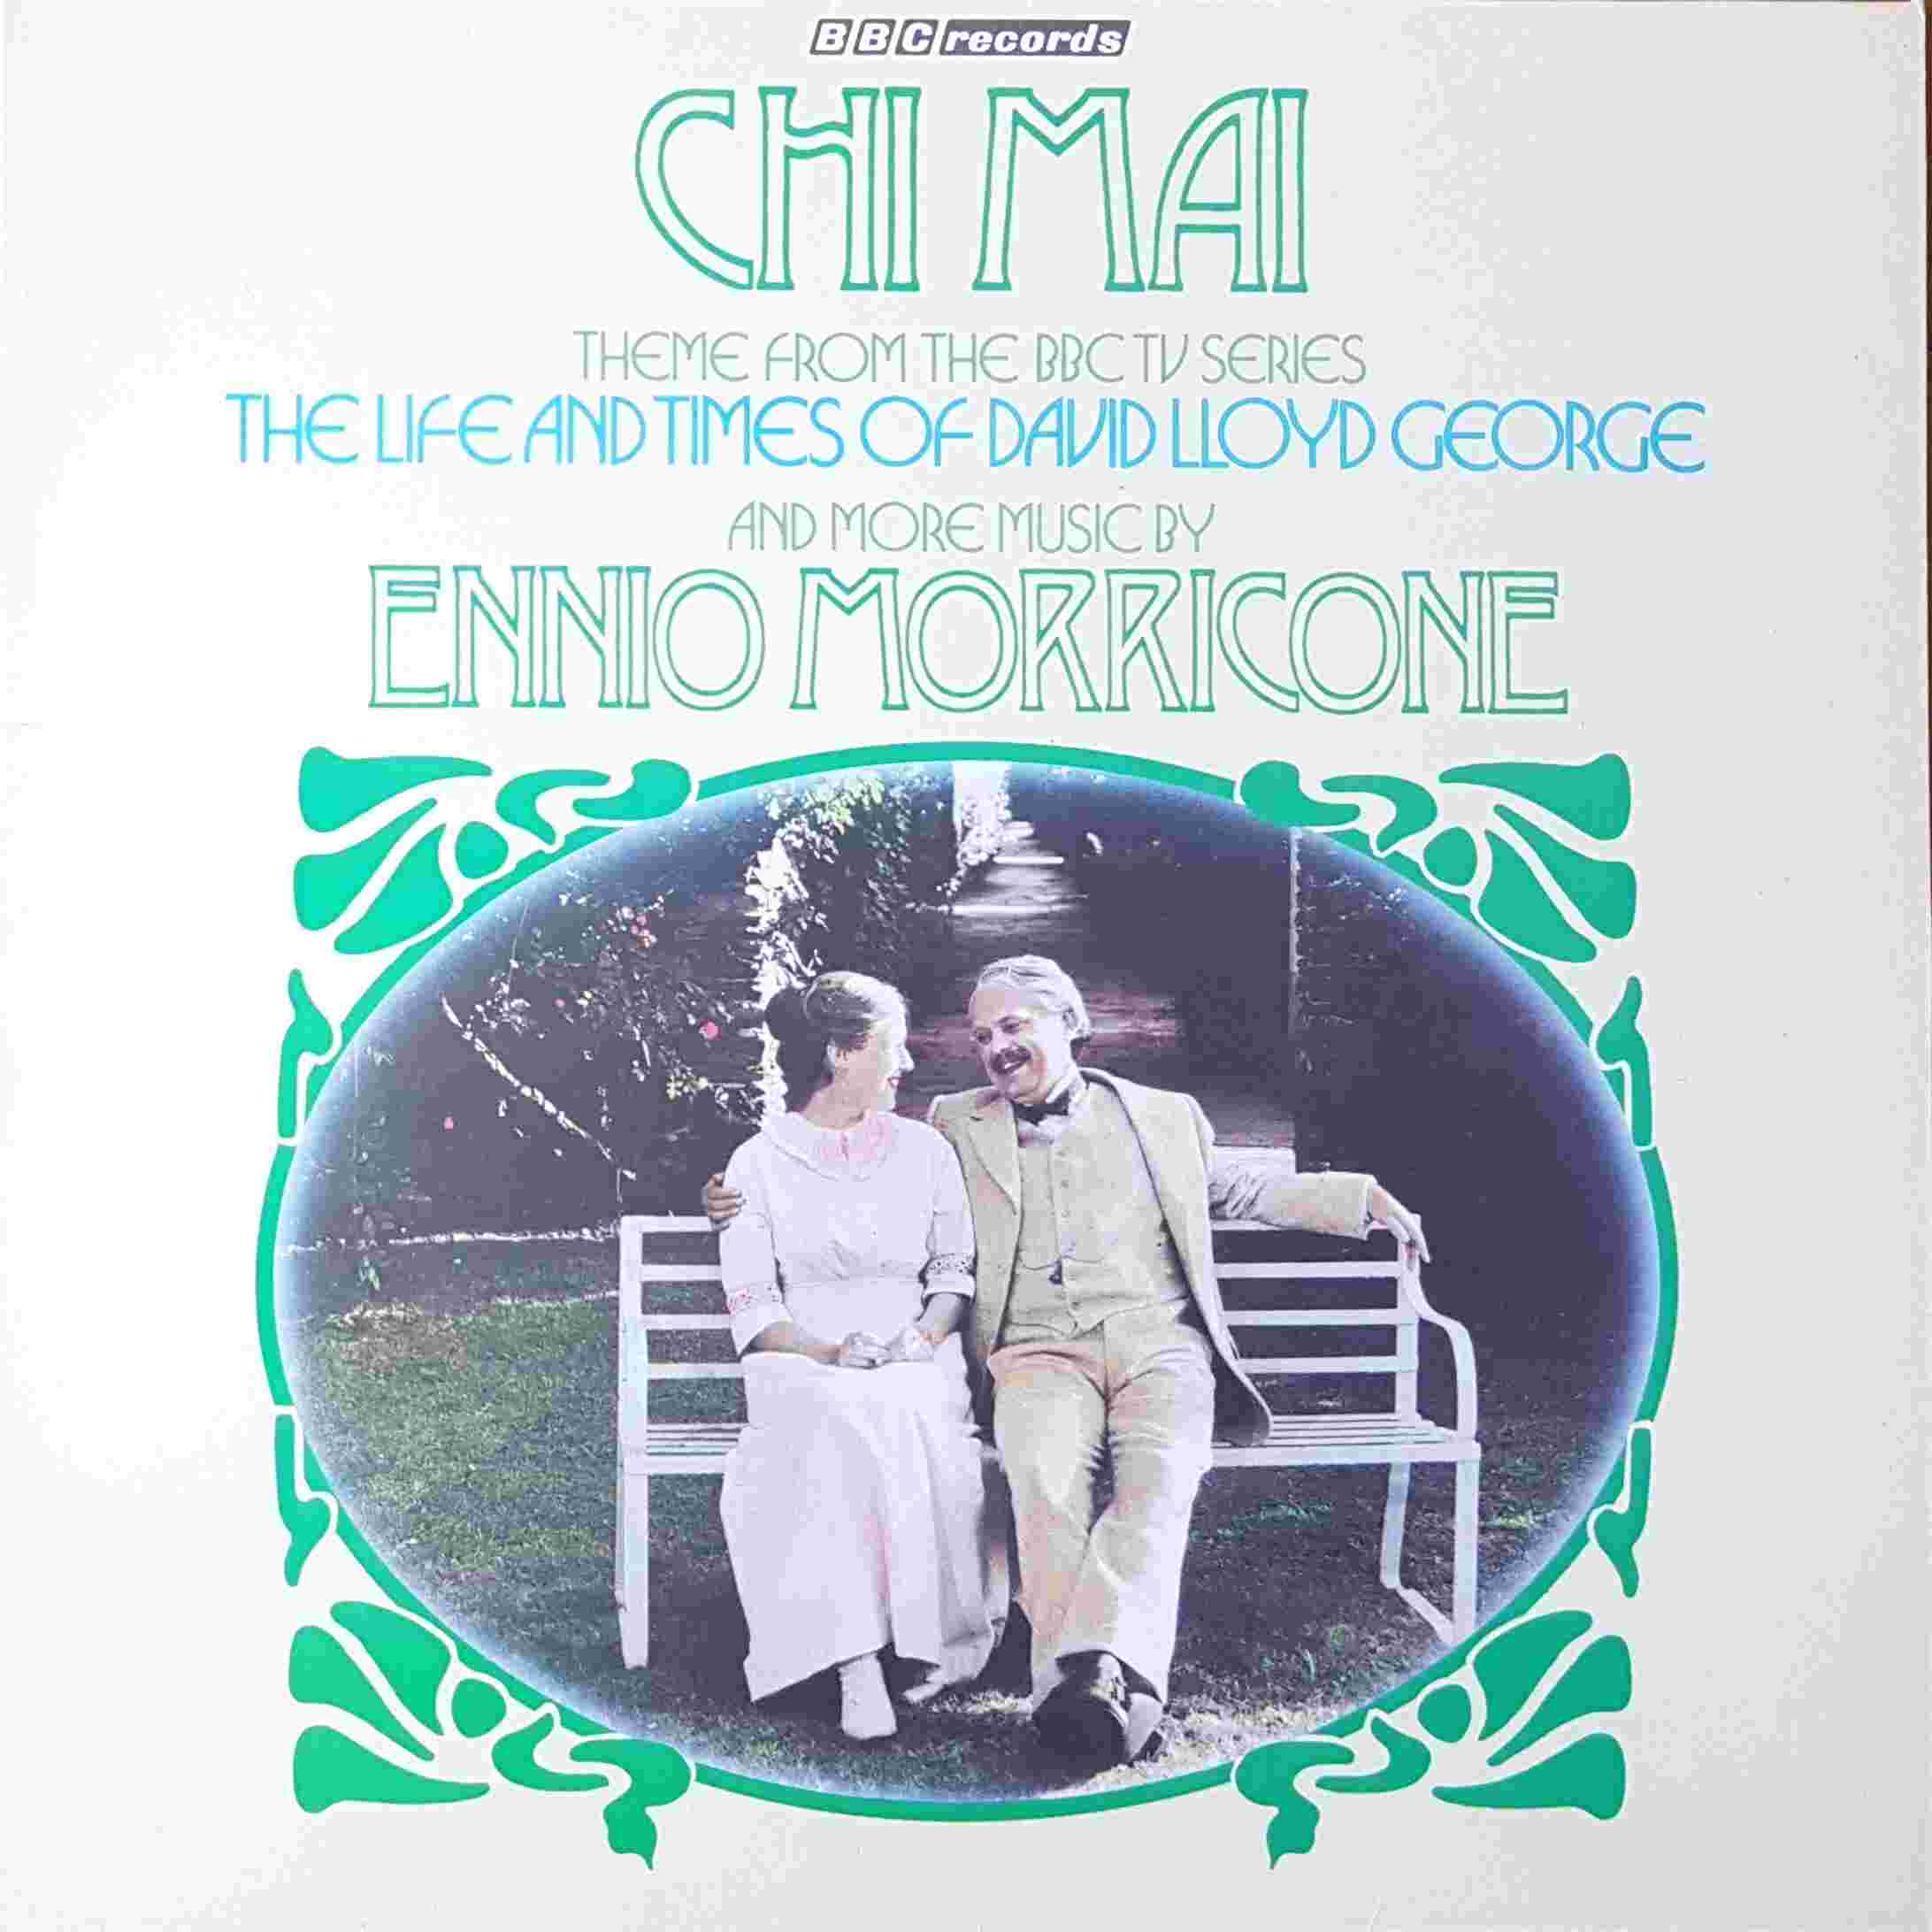 Picture of REH 414 Chi mai - The life and times of David Lloyd George by artist Ennio Morricone from the BBC albums - Records and Tapes library